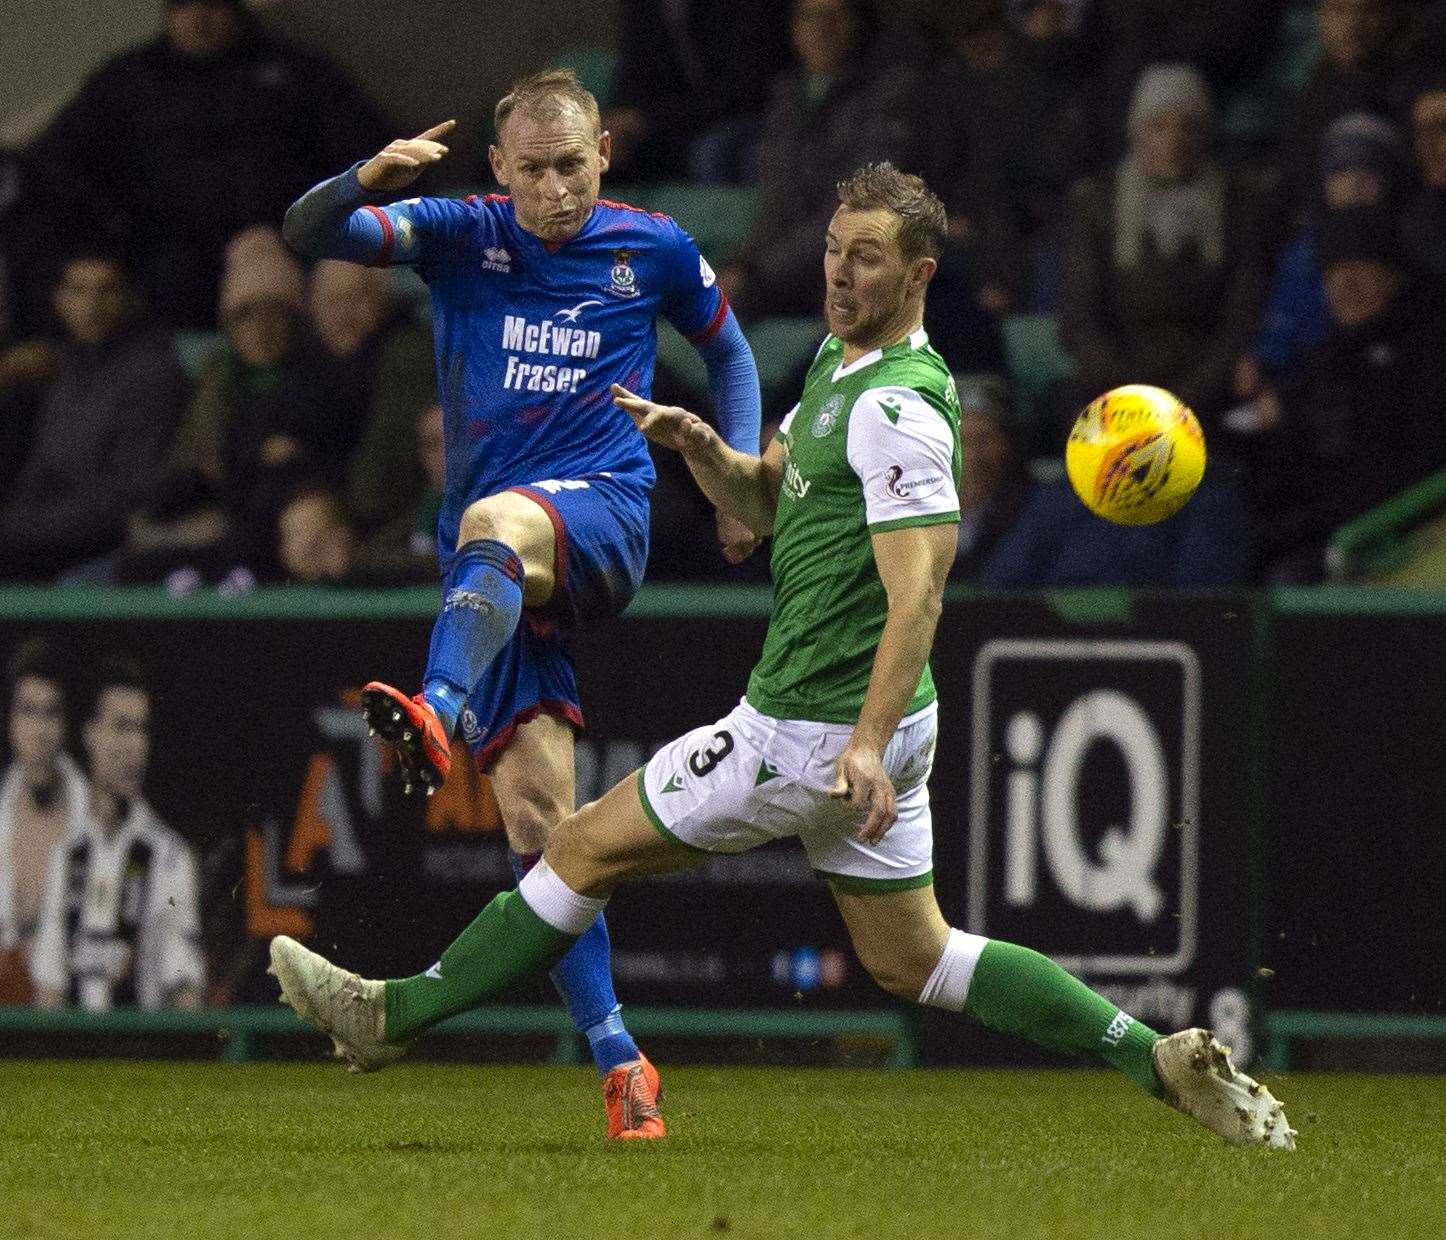 Picture - Ken Macpherson, Inverness. Scottish Cup Quarter-finals. Hibs(5) v Inverness CT(2). 28.02.20. ICT's Carl Tremarco clears the danger from his opposition number Hibs' Steven Whittaker.